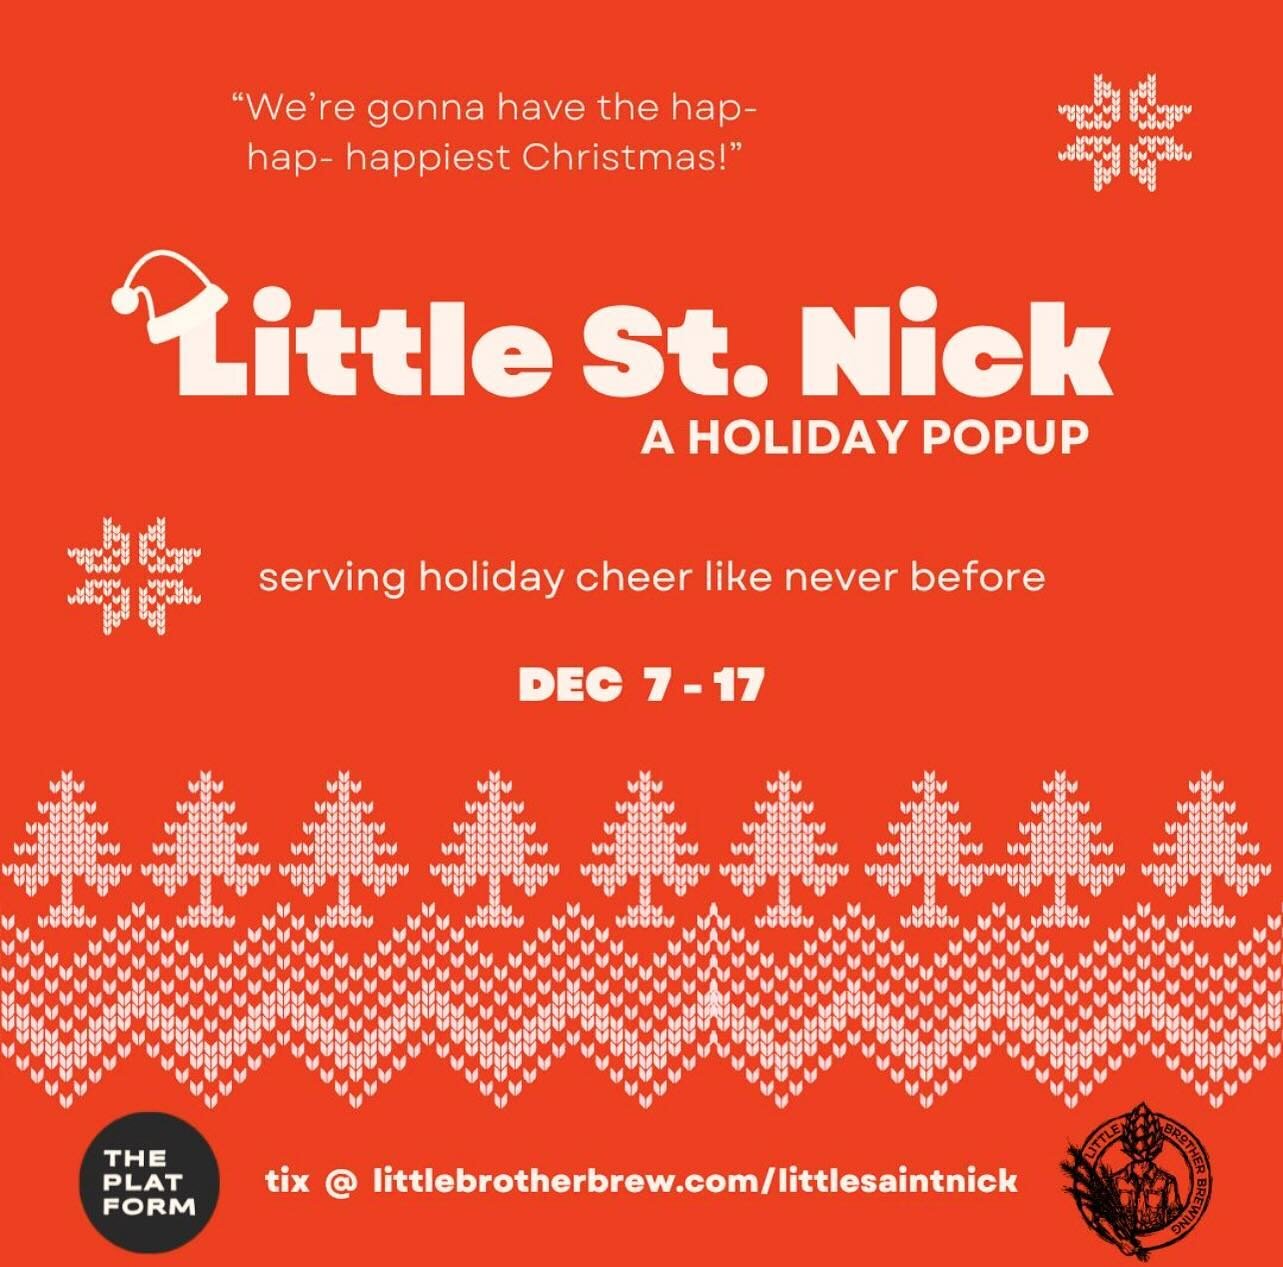 Magical Christmas content incoming🎄🎁🥂 

We&rsquo;ve been BUSY w our friends @littlebrotherbrew and Little St Nick is here! Get your tix now through Dec 17 ✨ littlebrotherbrew.com